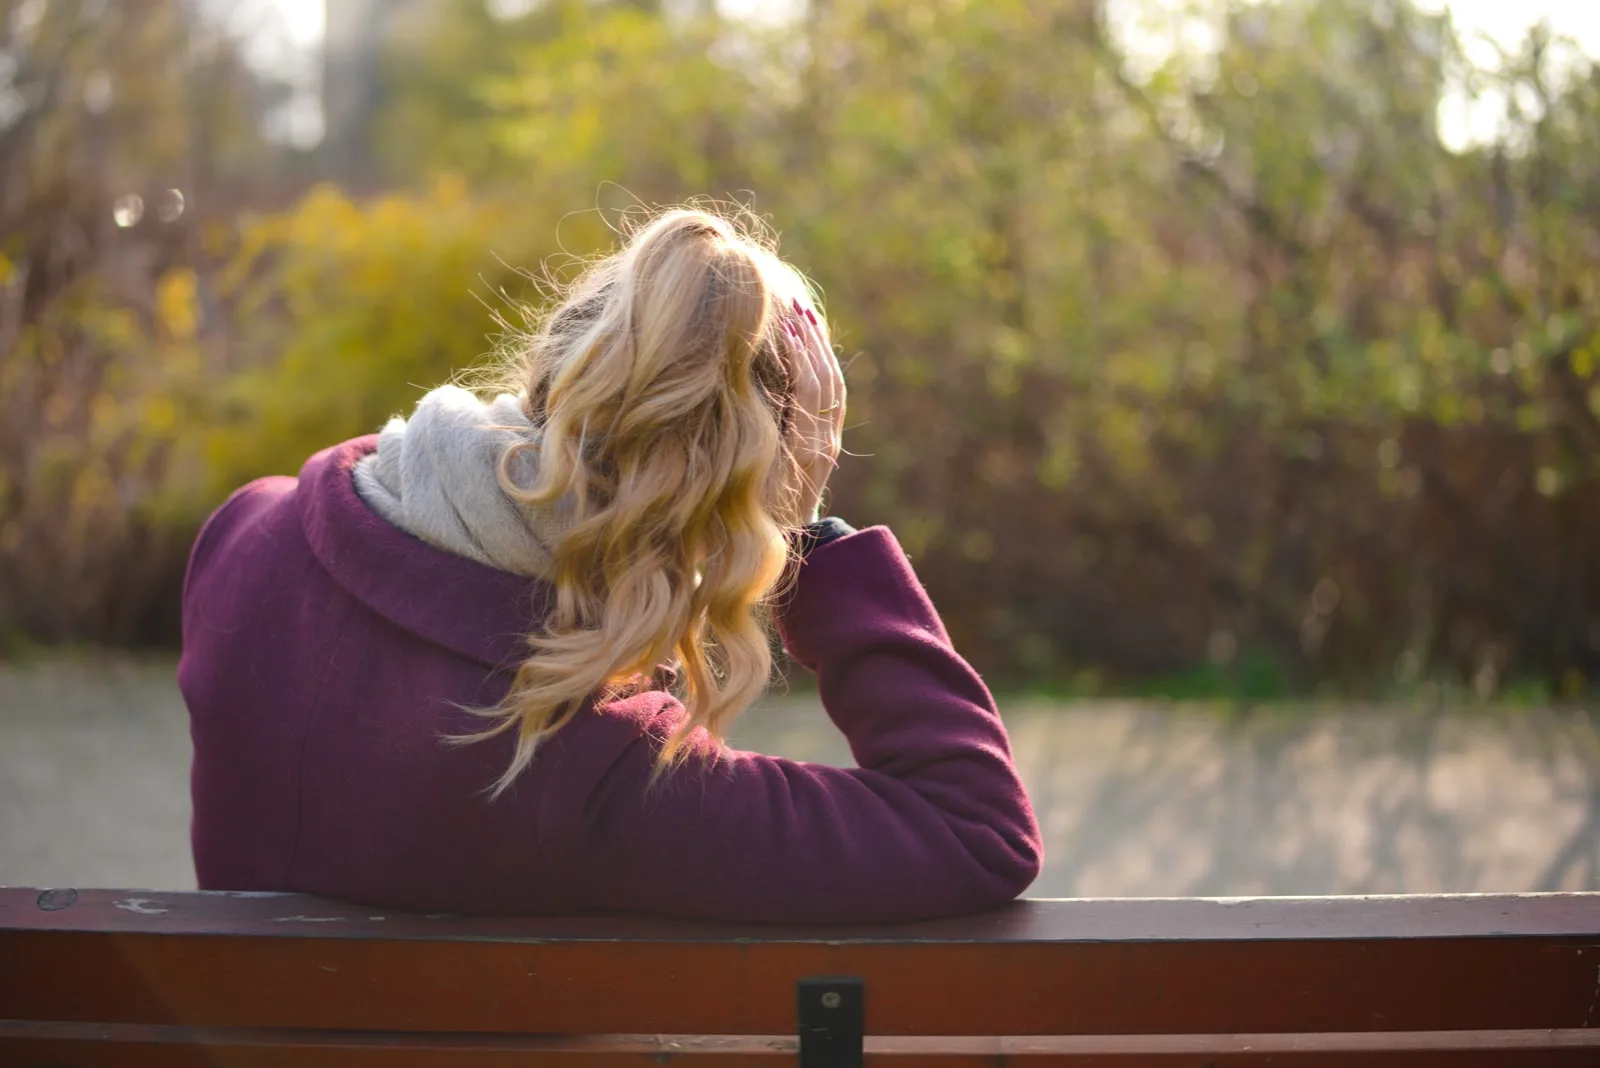 woman with blond hair sitting on a bench in the park